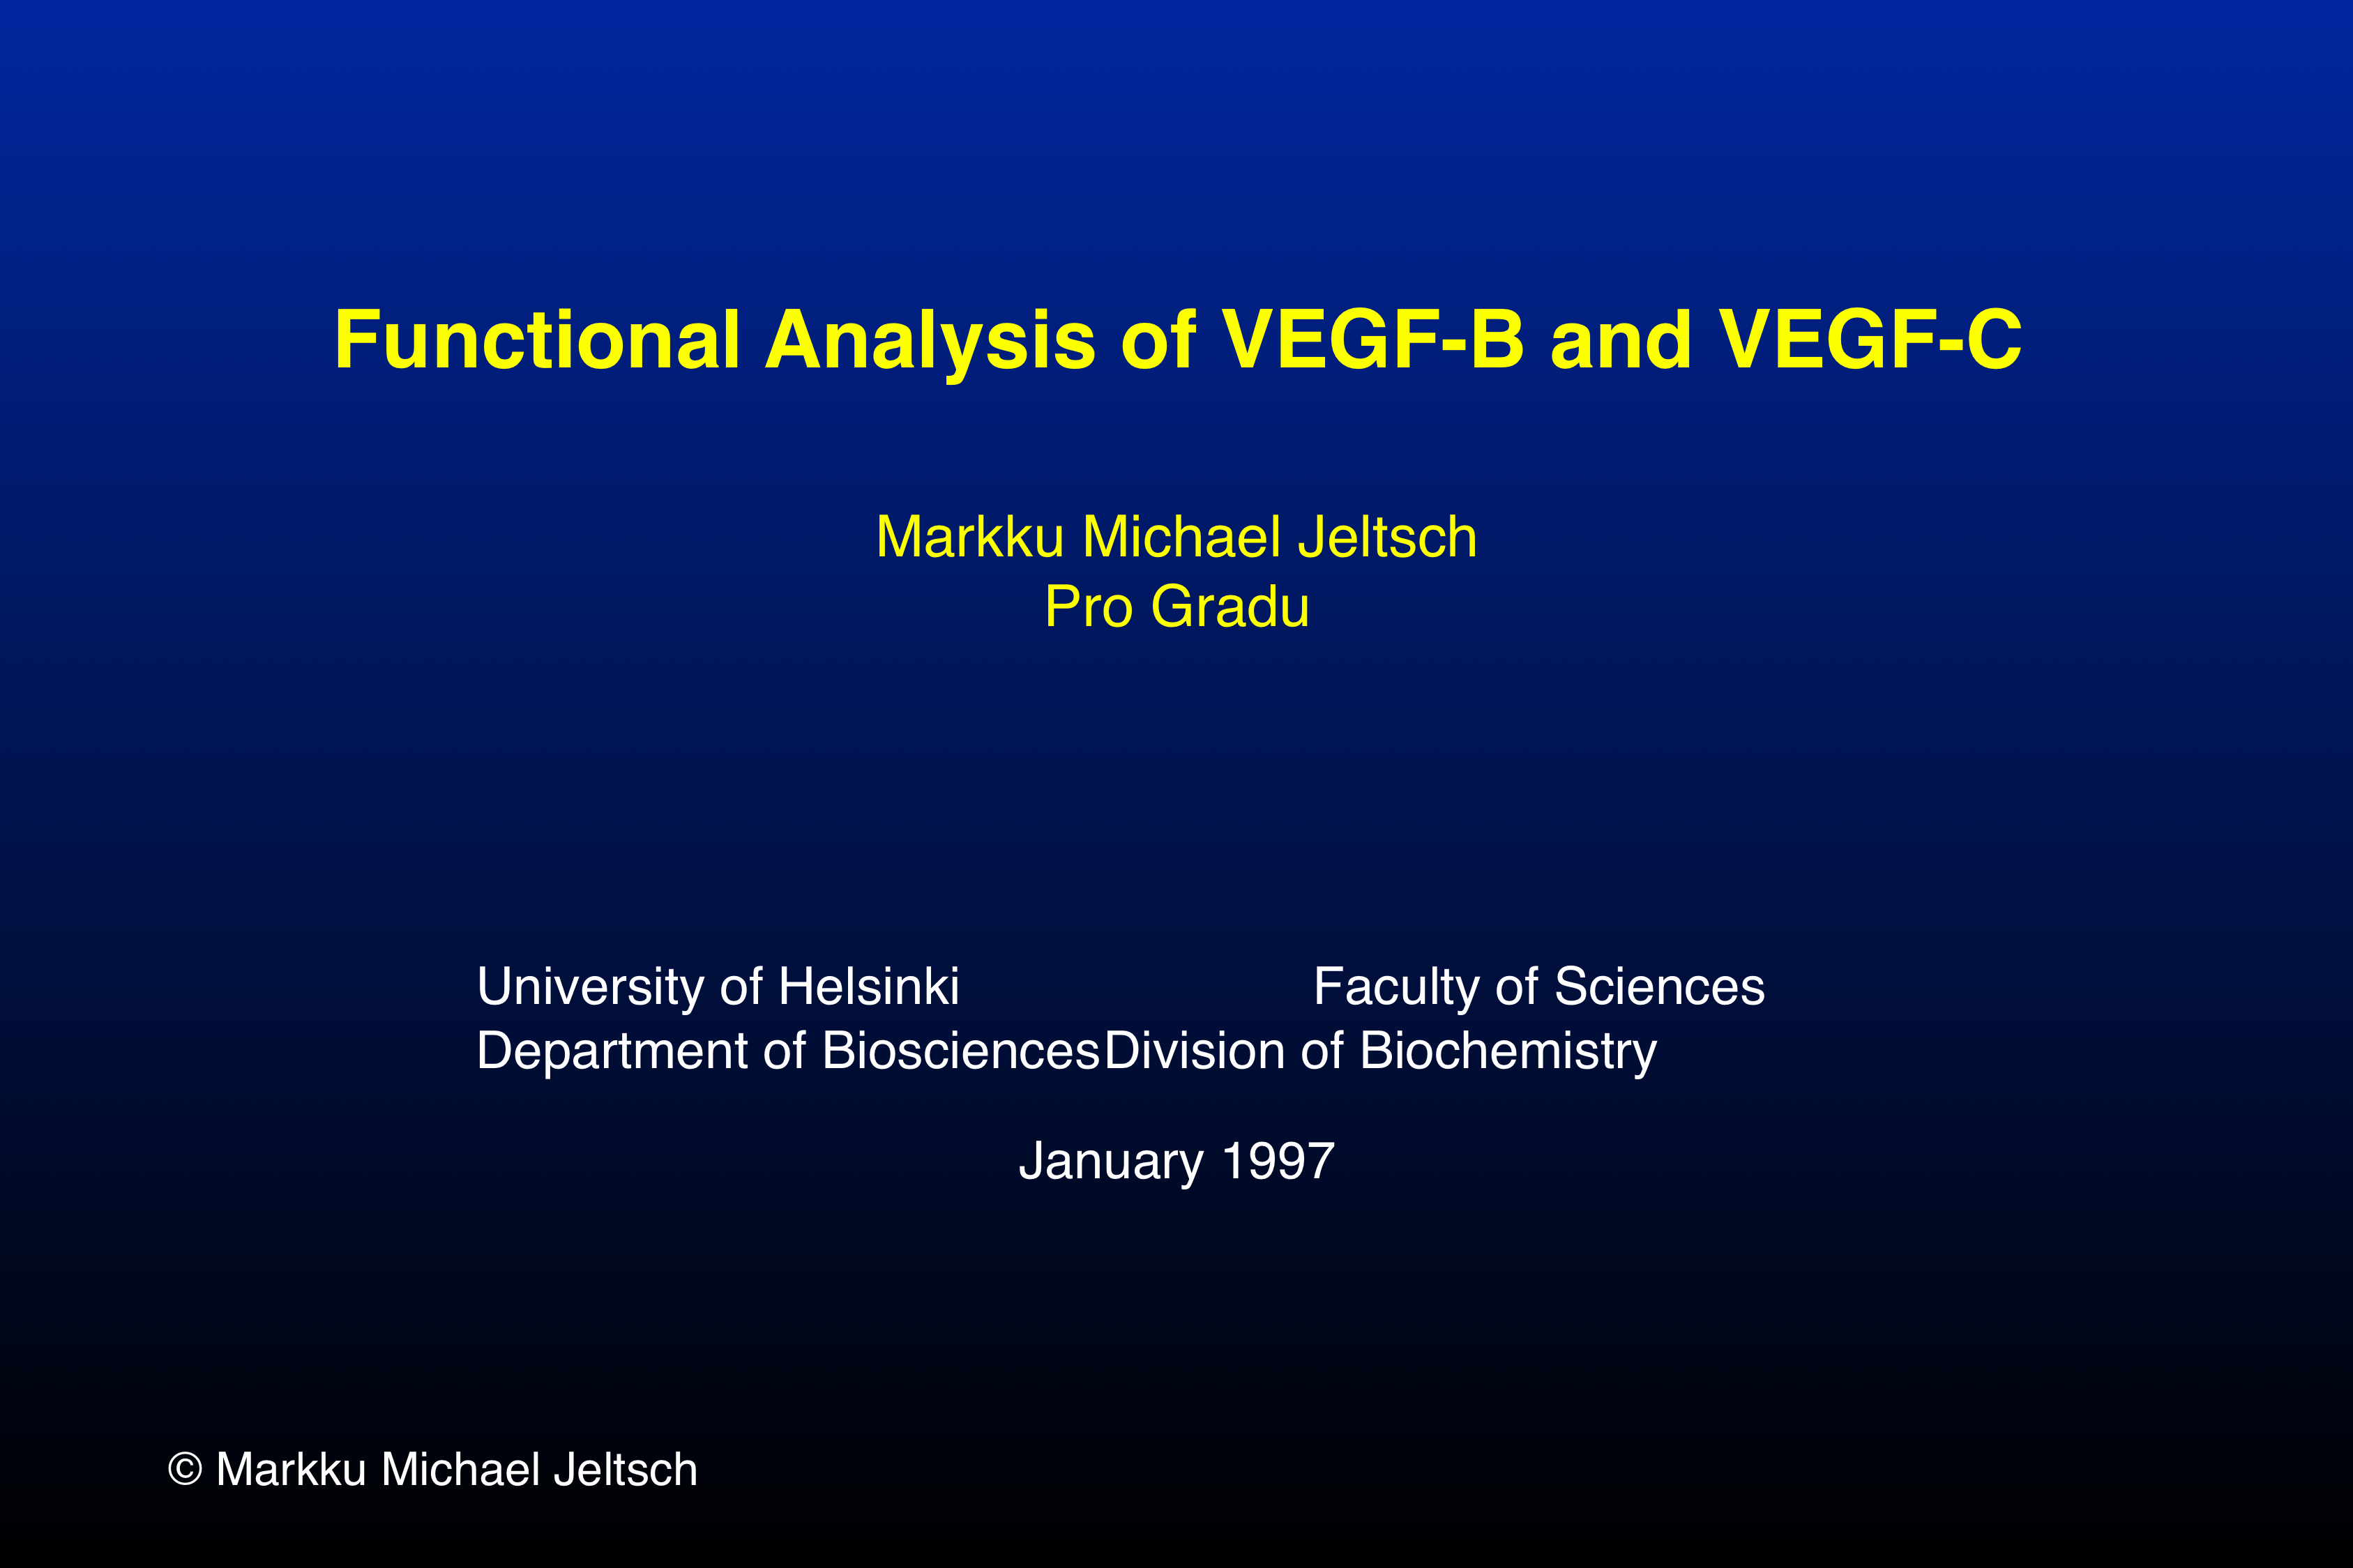 Title slide: Functional Analysis of VEGF-B and VEGF-C